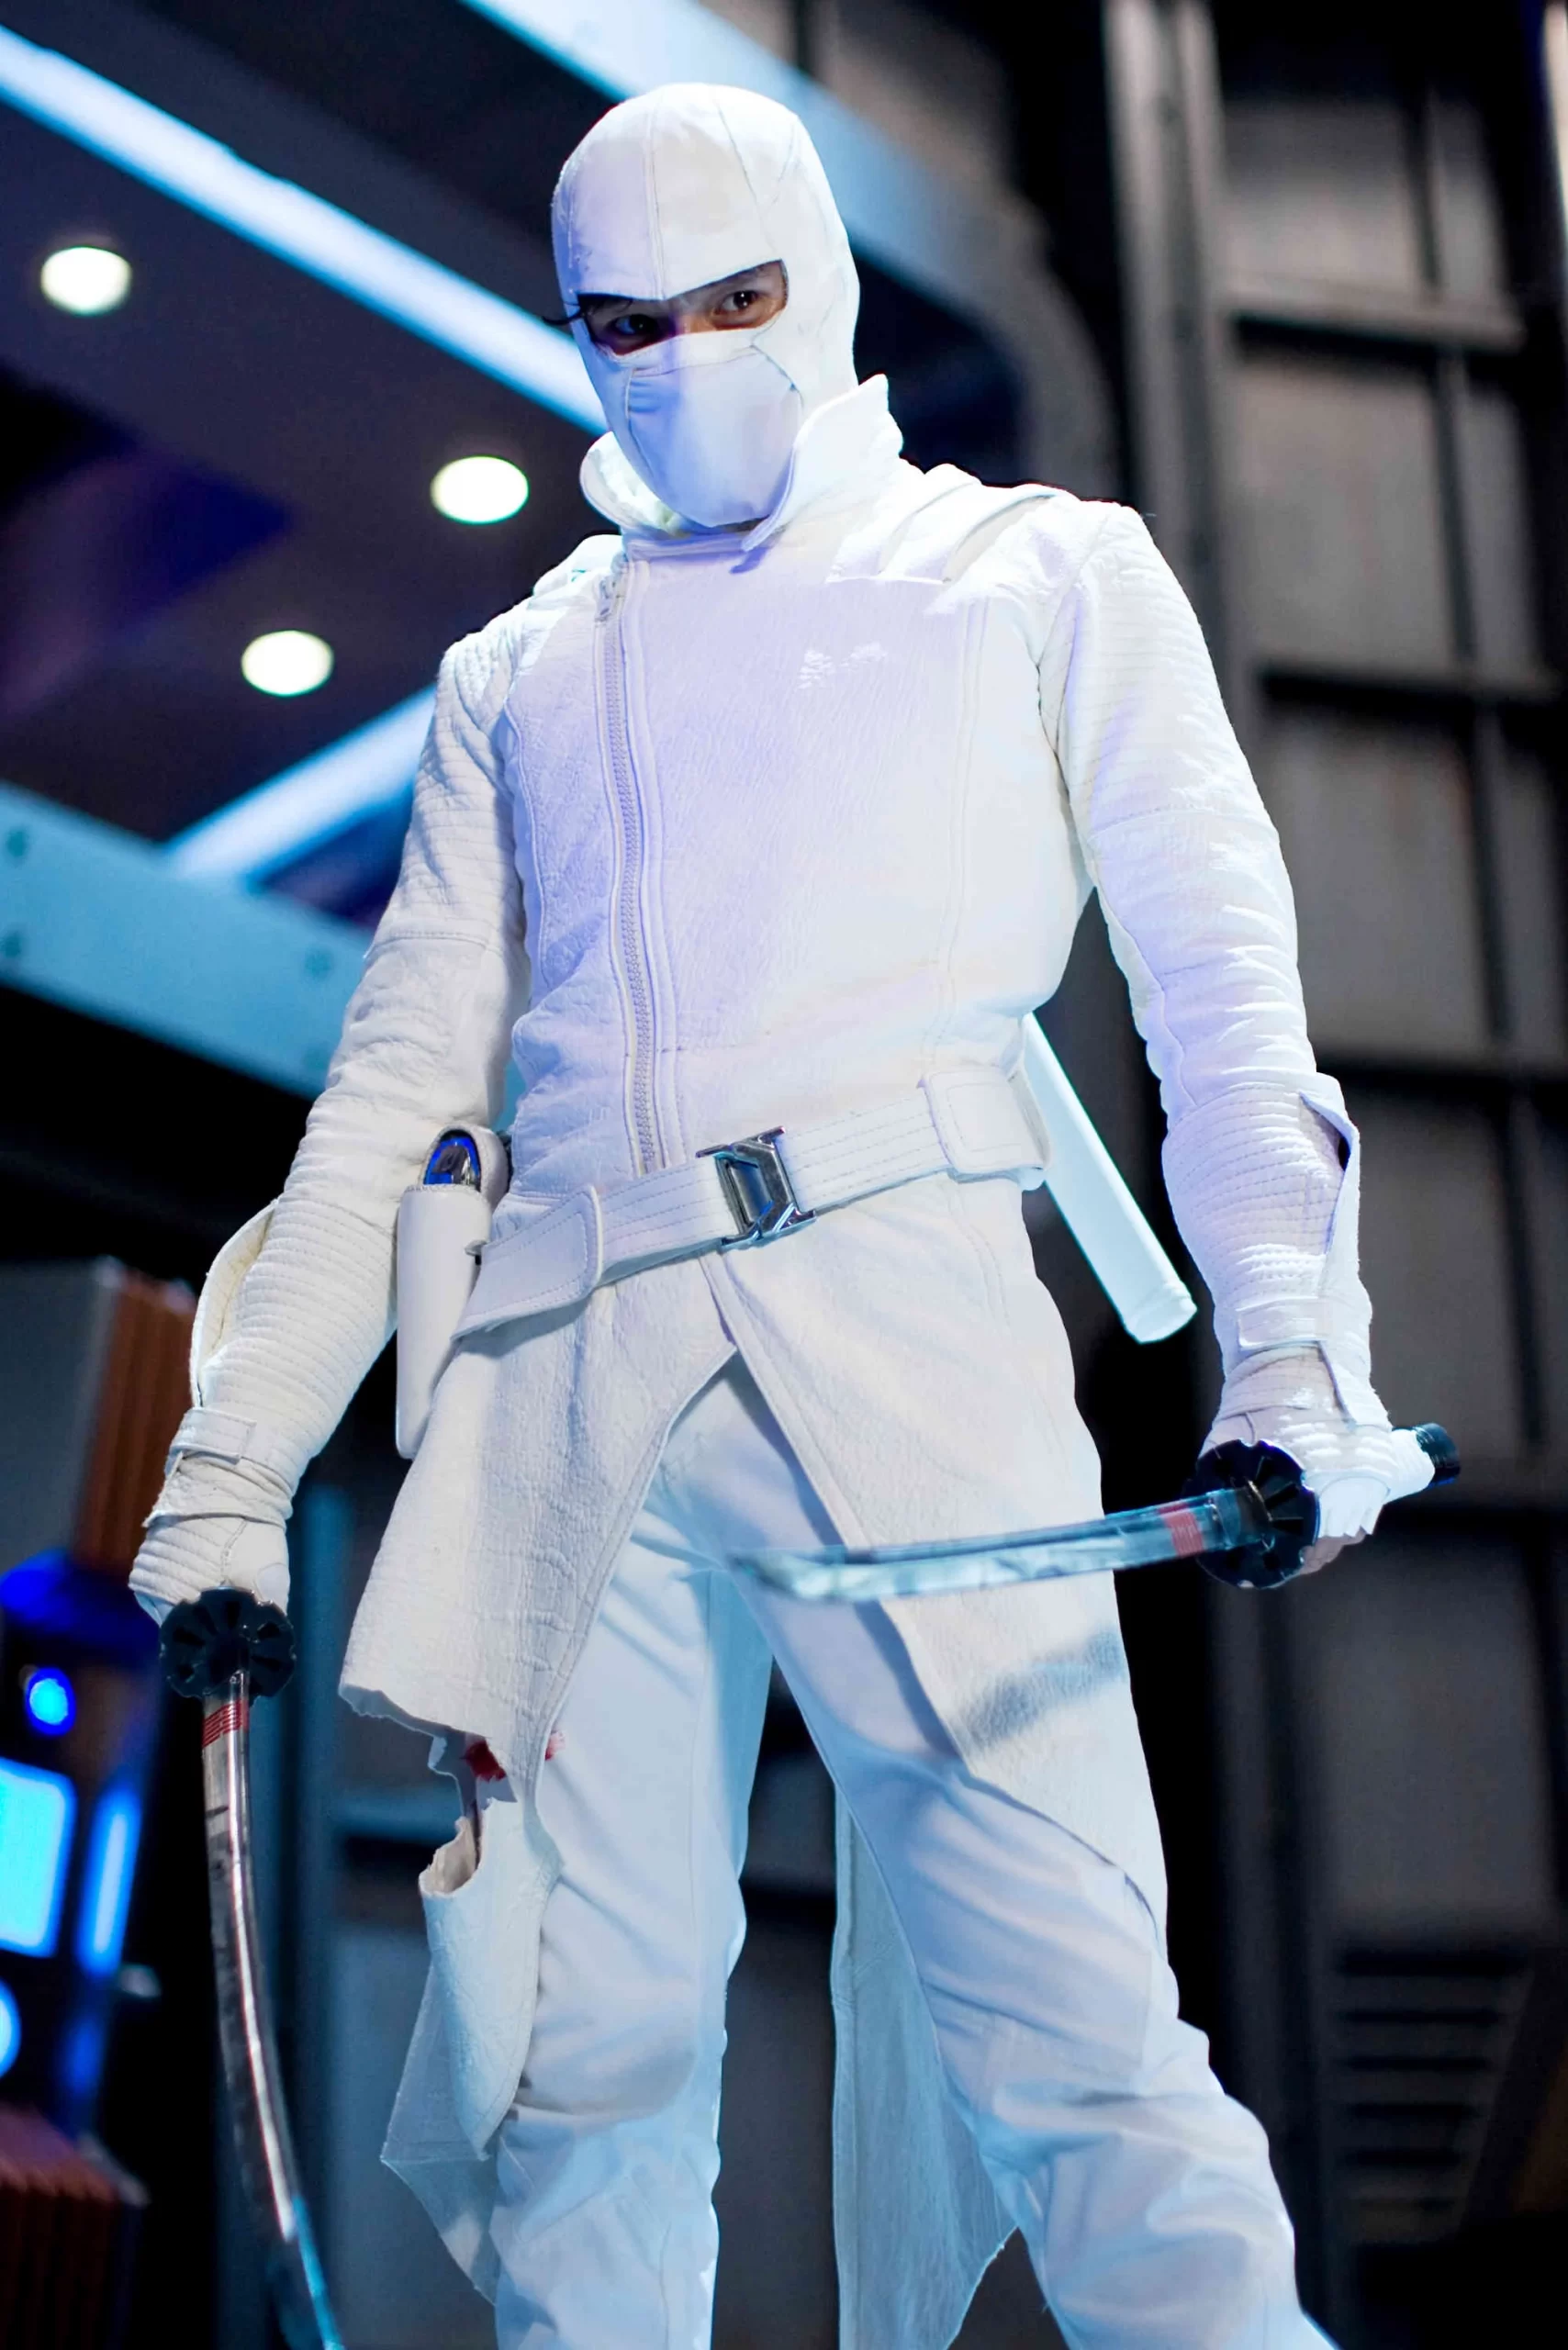 Storm Shadow as seen in the movies